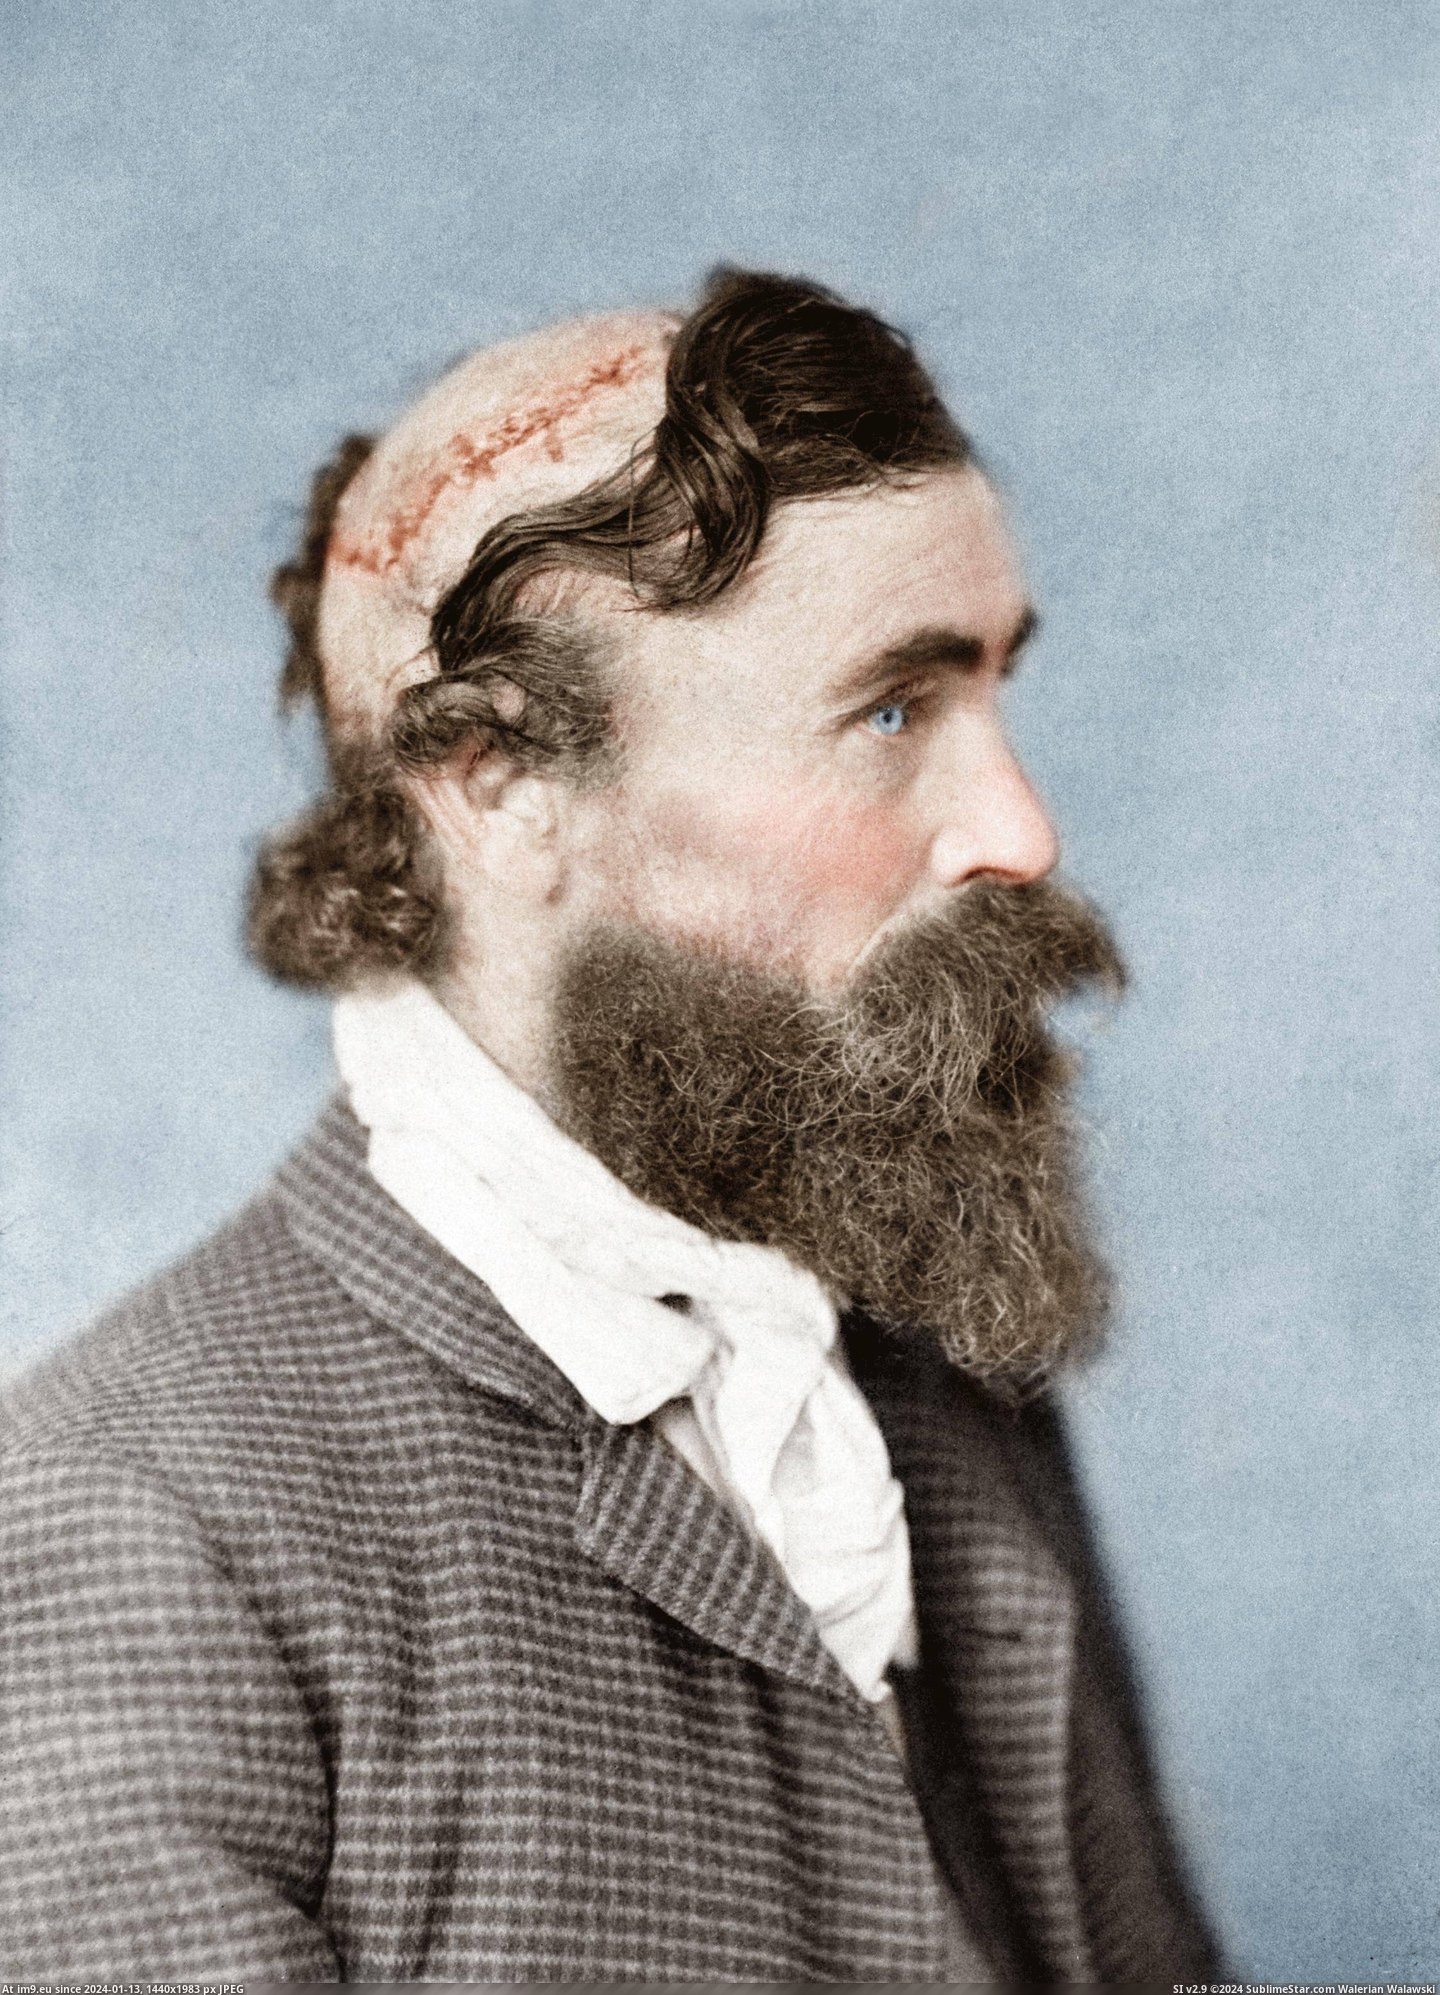 #Wtf #Was #Man #Sioux #Chief #Mcgee #Scalped #Child #Turtle #Robert [Wtf] Robert McGee, a man who was scalped as a child by the Sioux Chief Little Turtle, 1864 Pic. (Image of album My r/WTF favs))